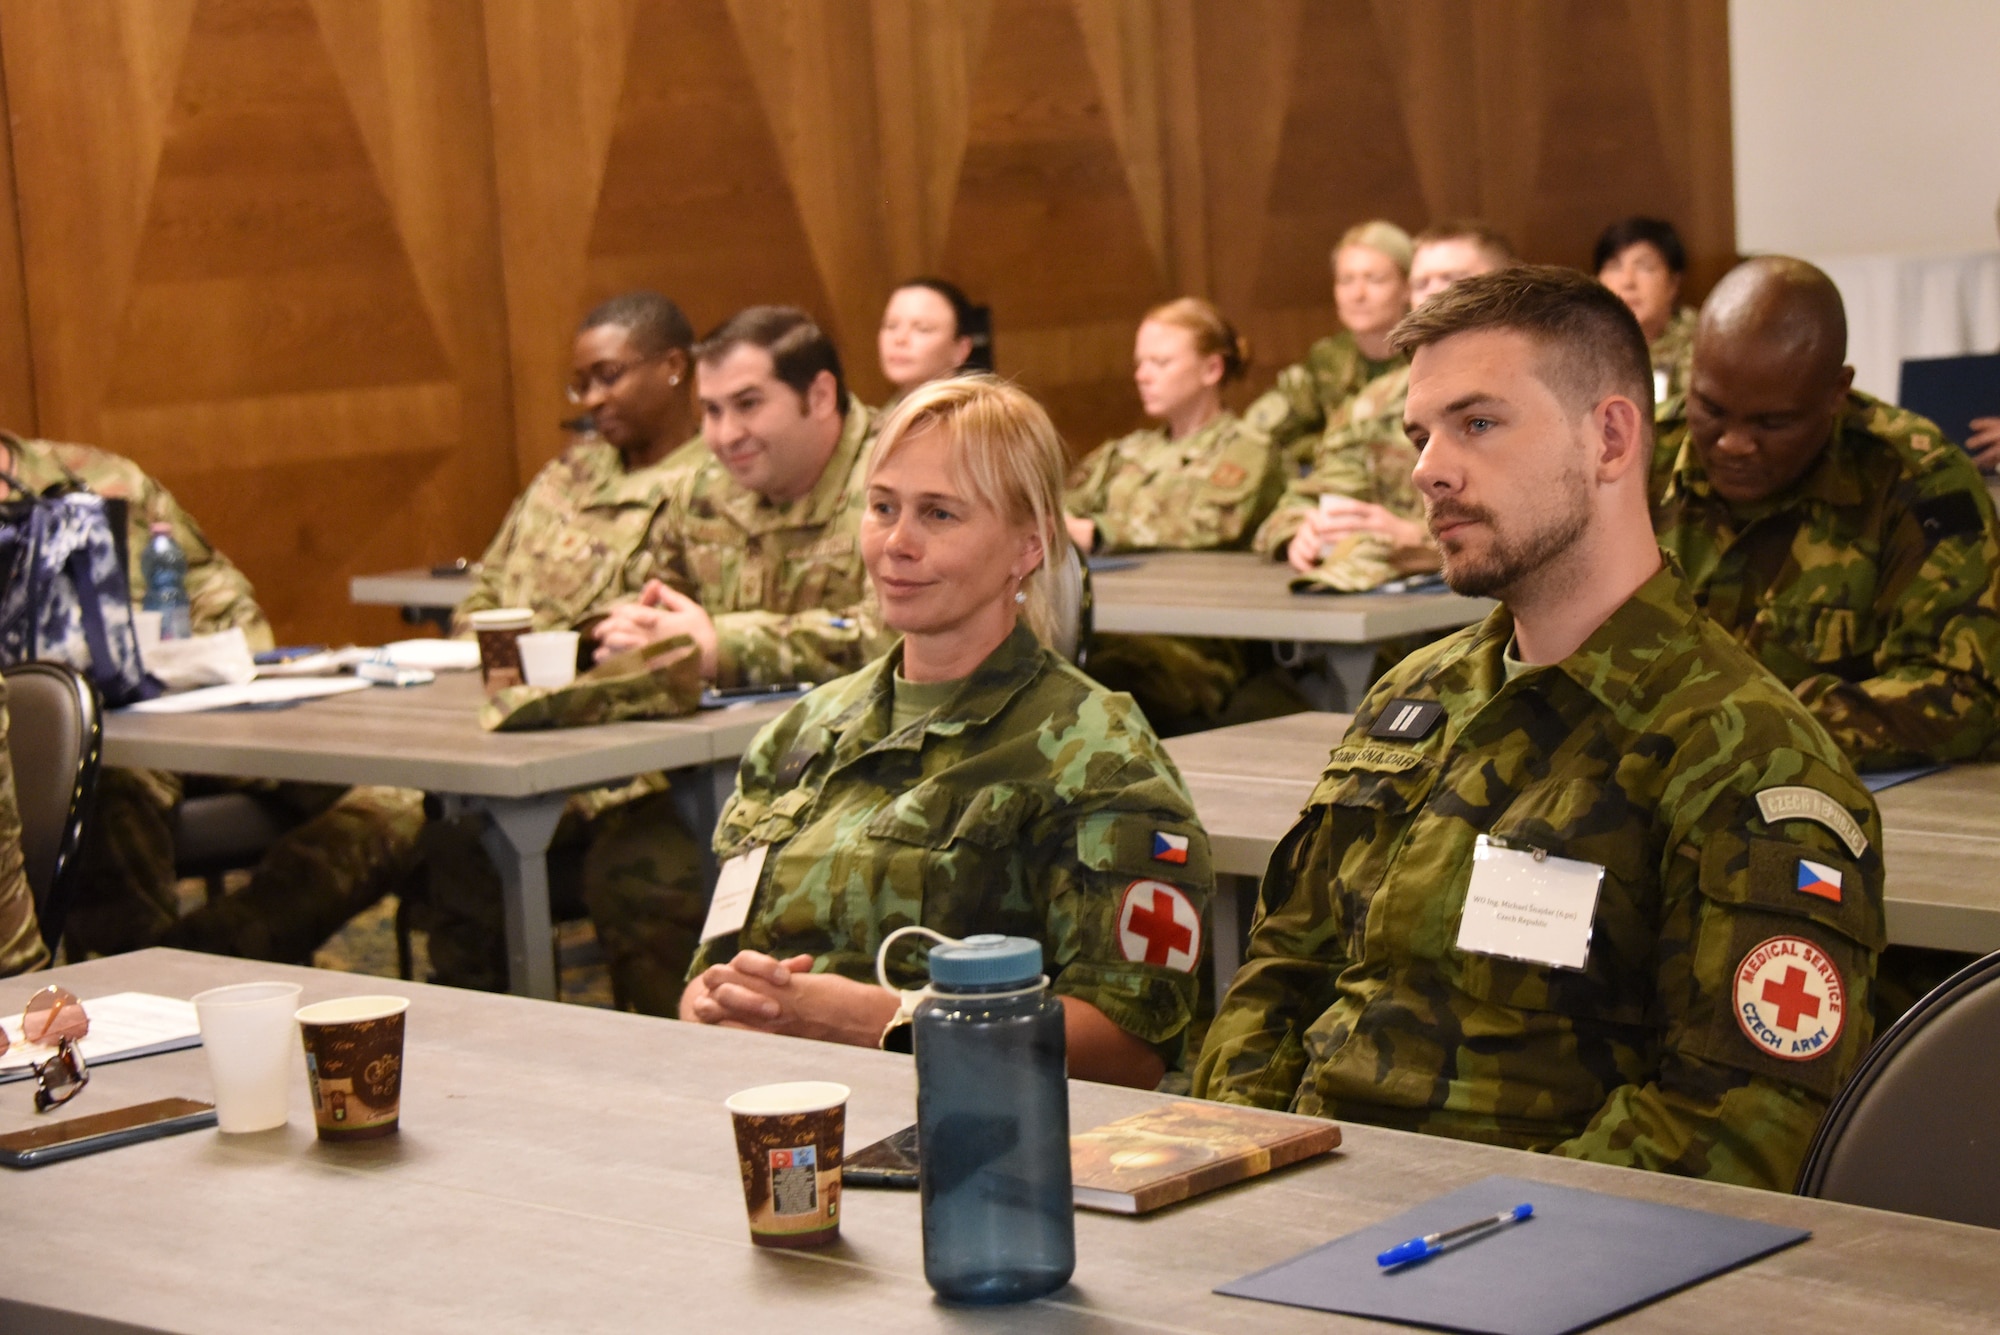 Airmen, Soldiers, and foreign delegates from Botswana, Czech Republic, North Macedonia,  Romania, and Slovenia listen to a talk on “Strength through resilience” during U.S. Air Forces in Europe - Air Forces Africa’s European-African Military Nursing Exchange conference at Ramstein Air Base, Germany, May 9, 2022.